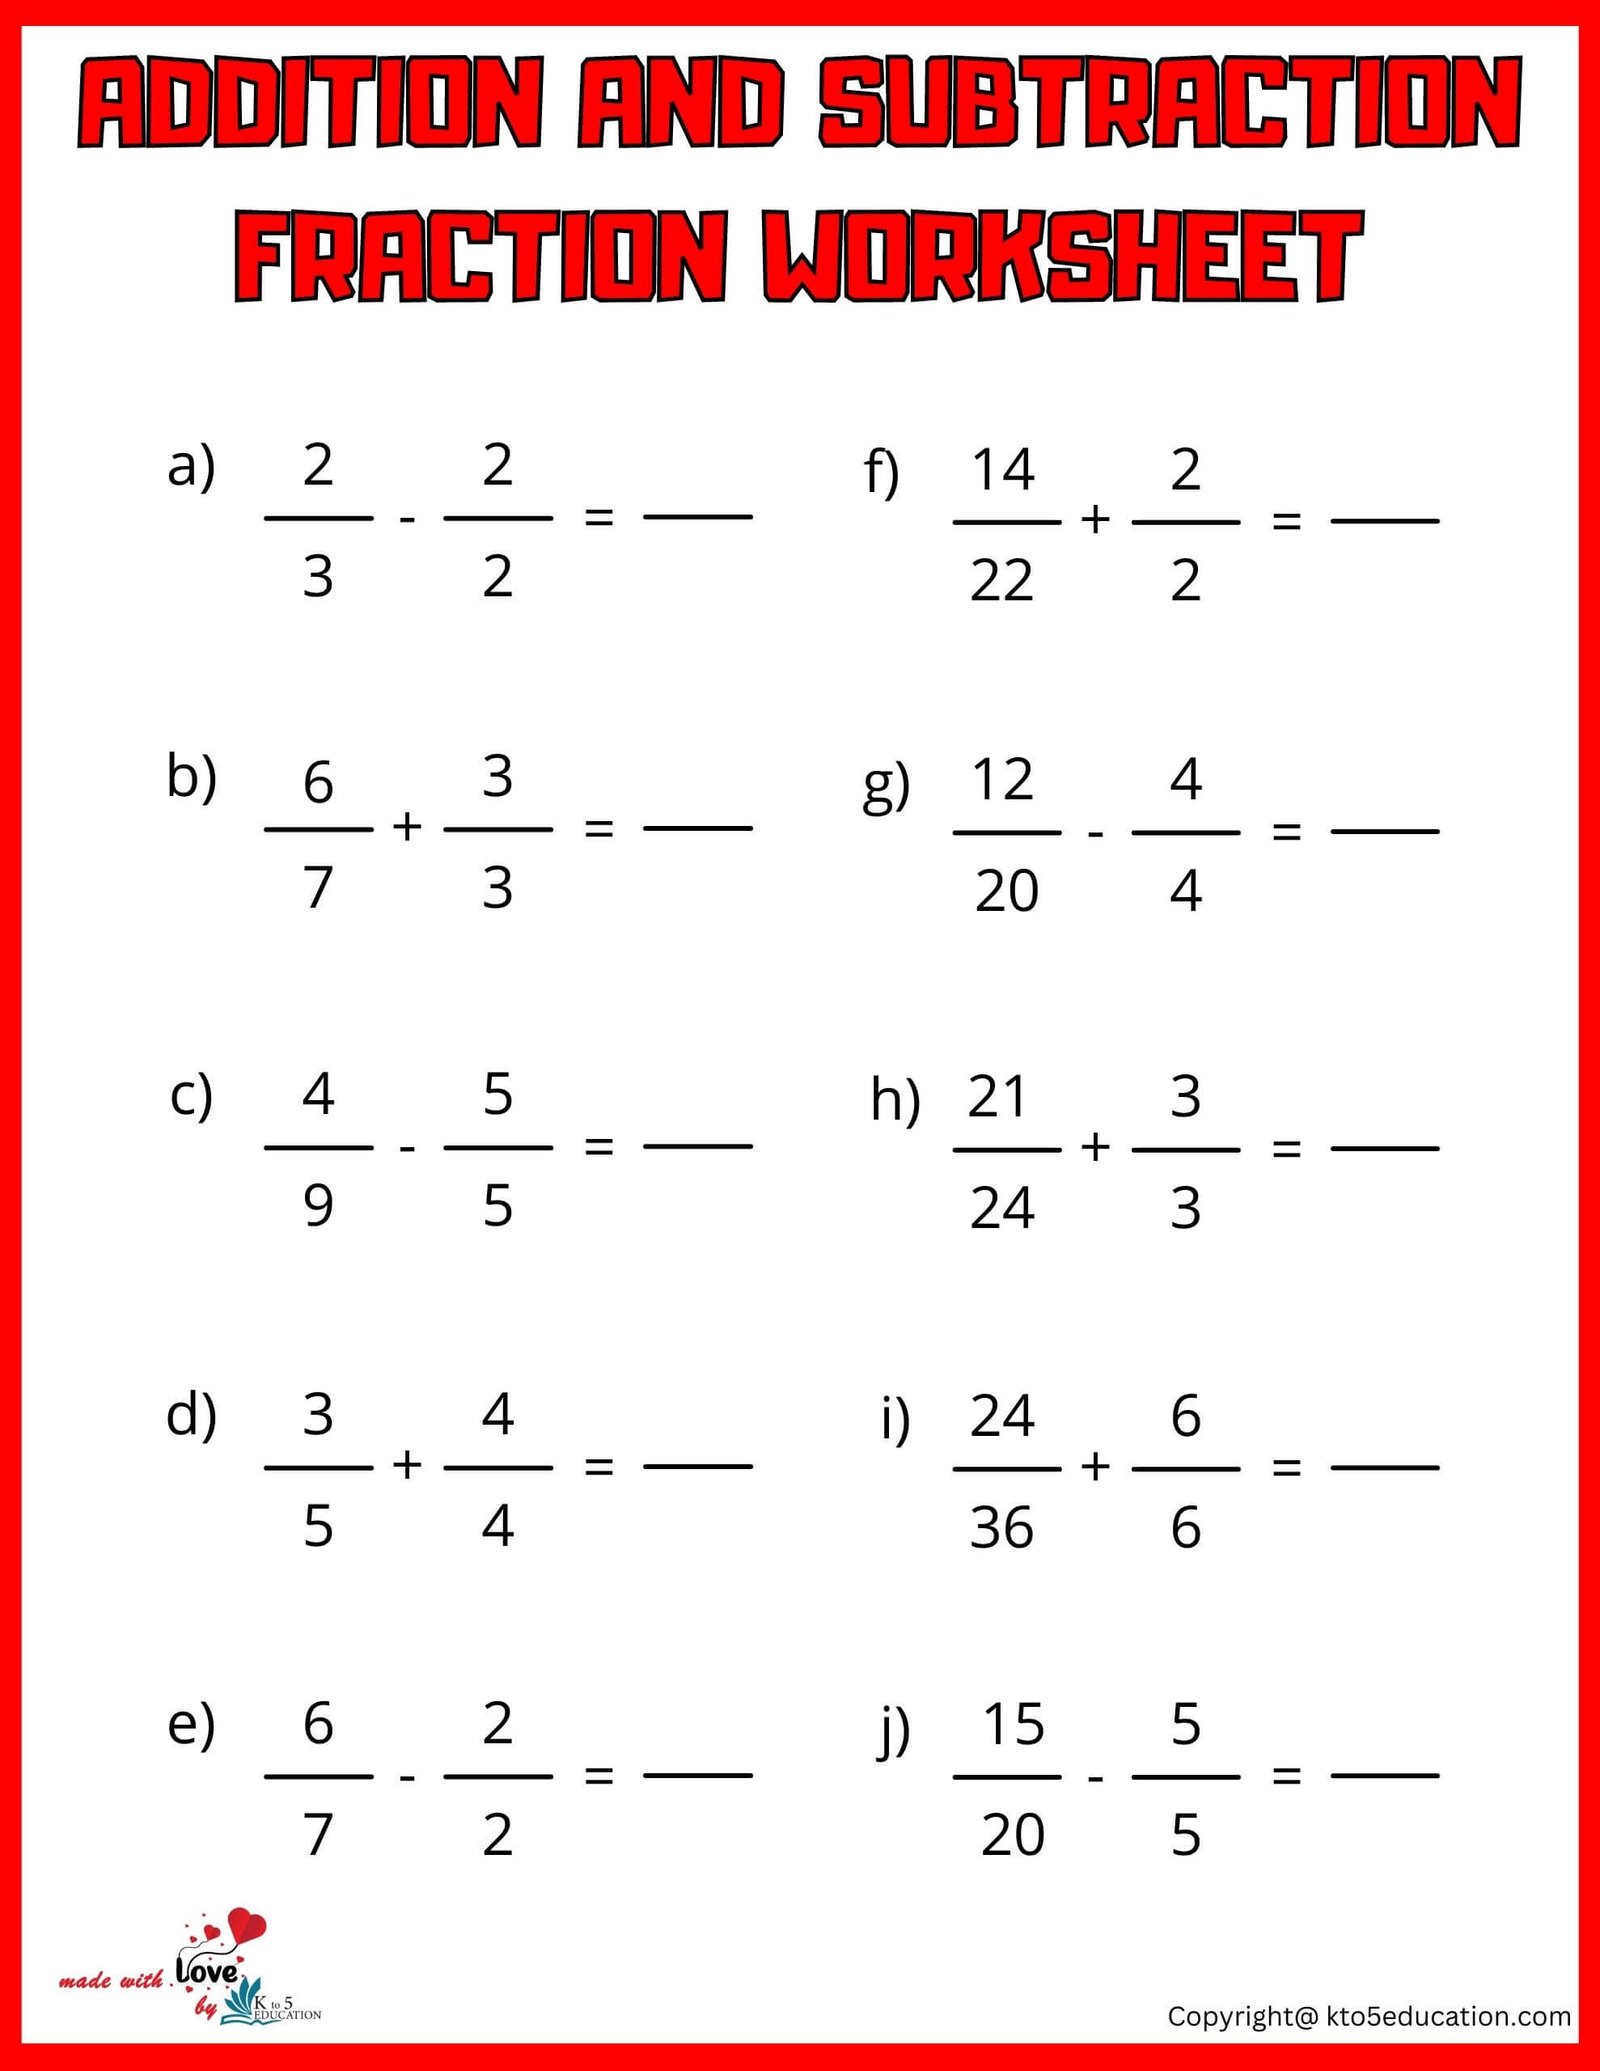 4th Grade Addition And Subtraction Fraction Worksheet